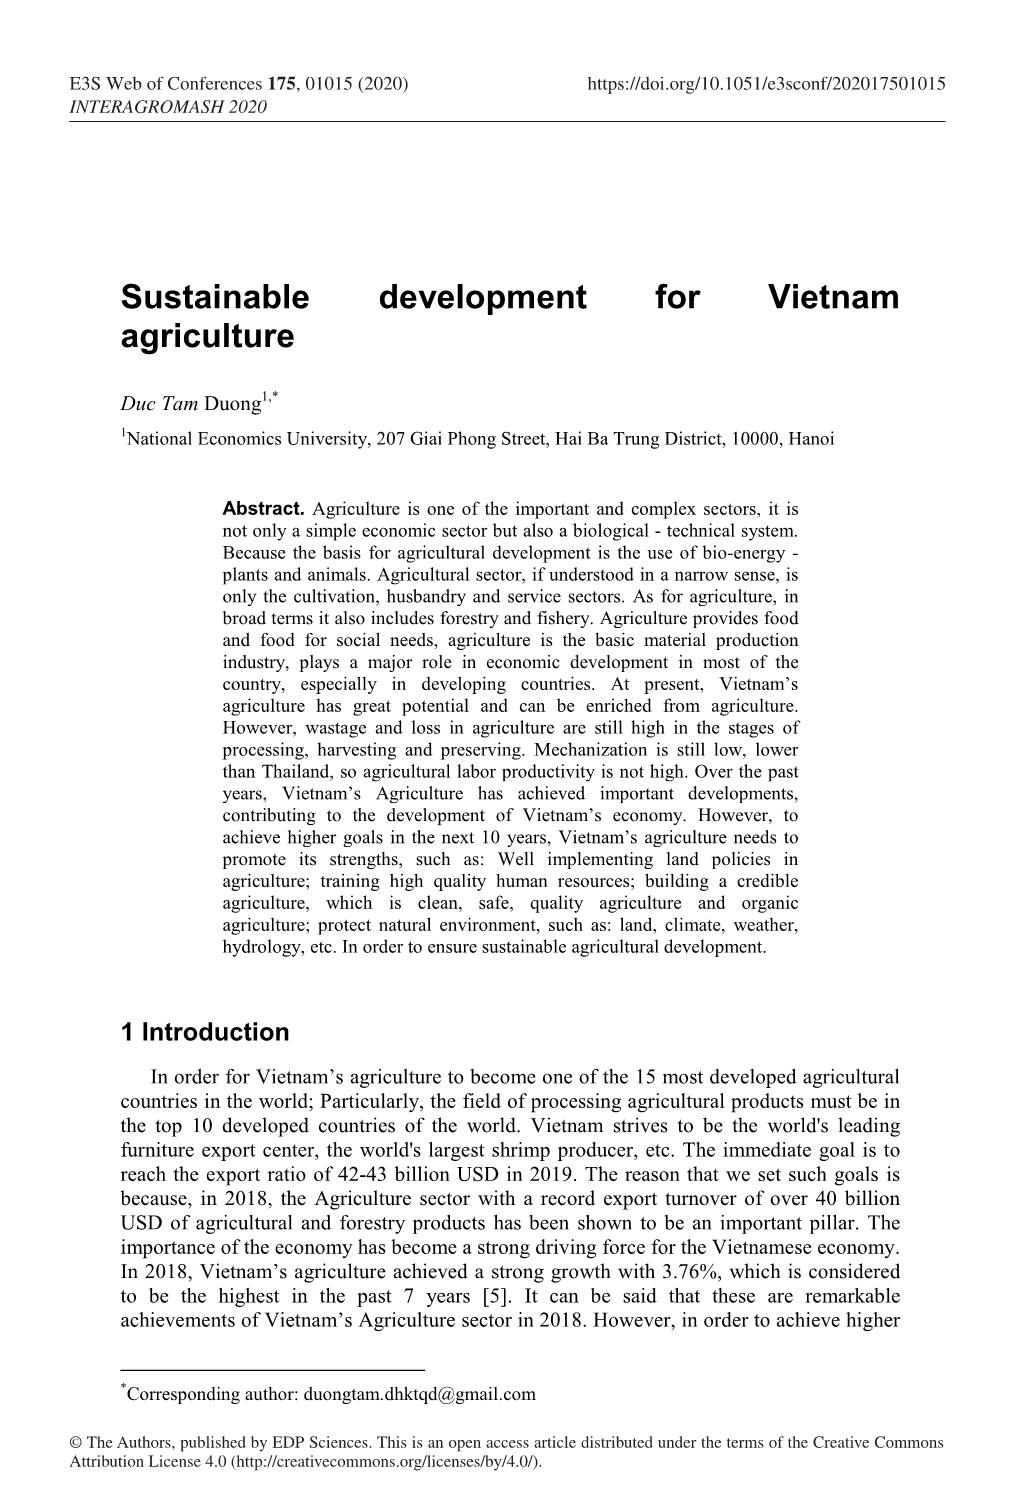 Sustainable Development for Vietnam Agriculture